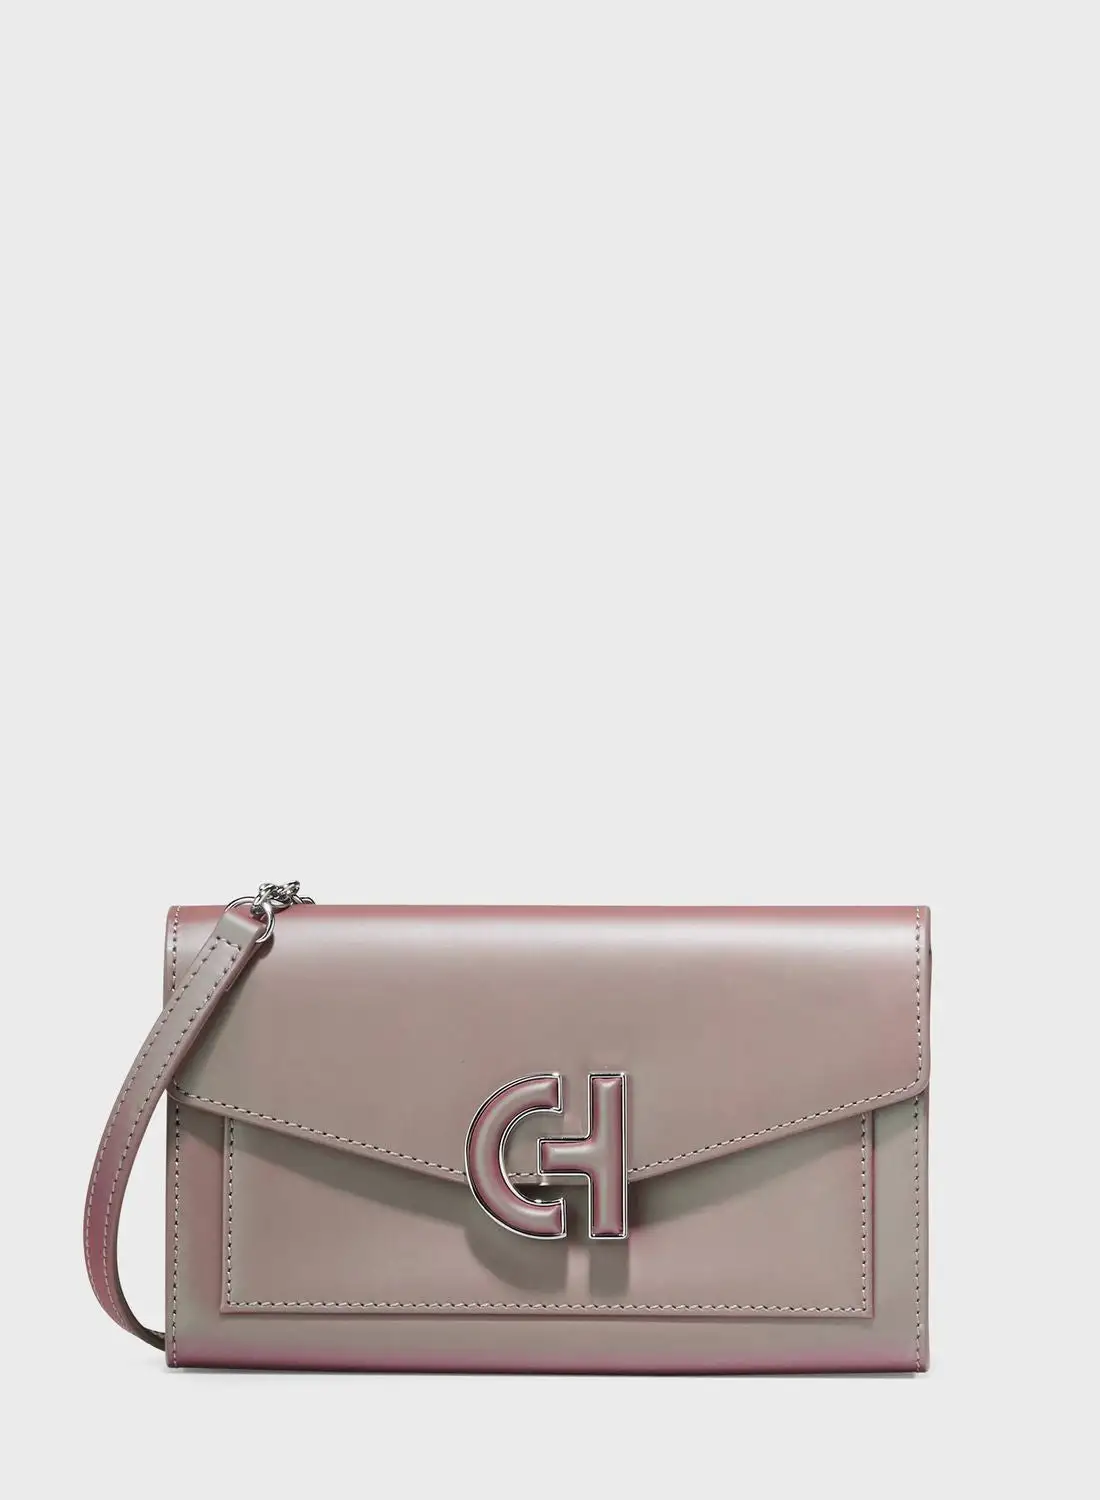 COLE HAAN Logo Detailed Flap Over Clutches